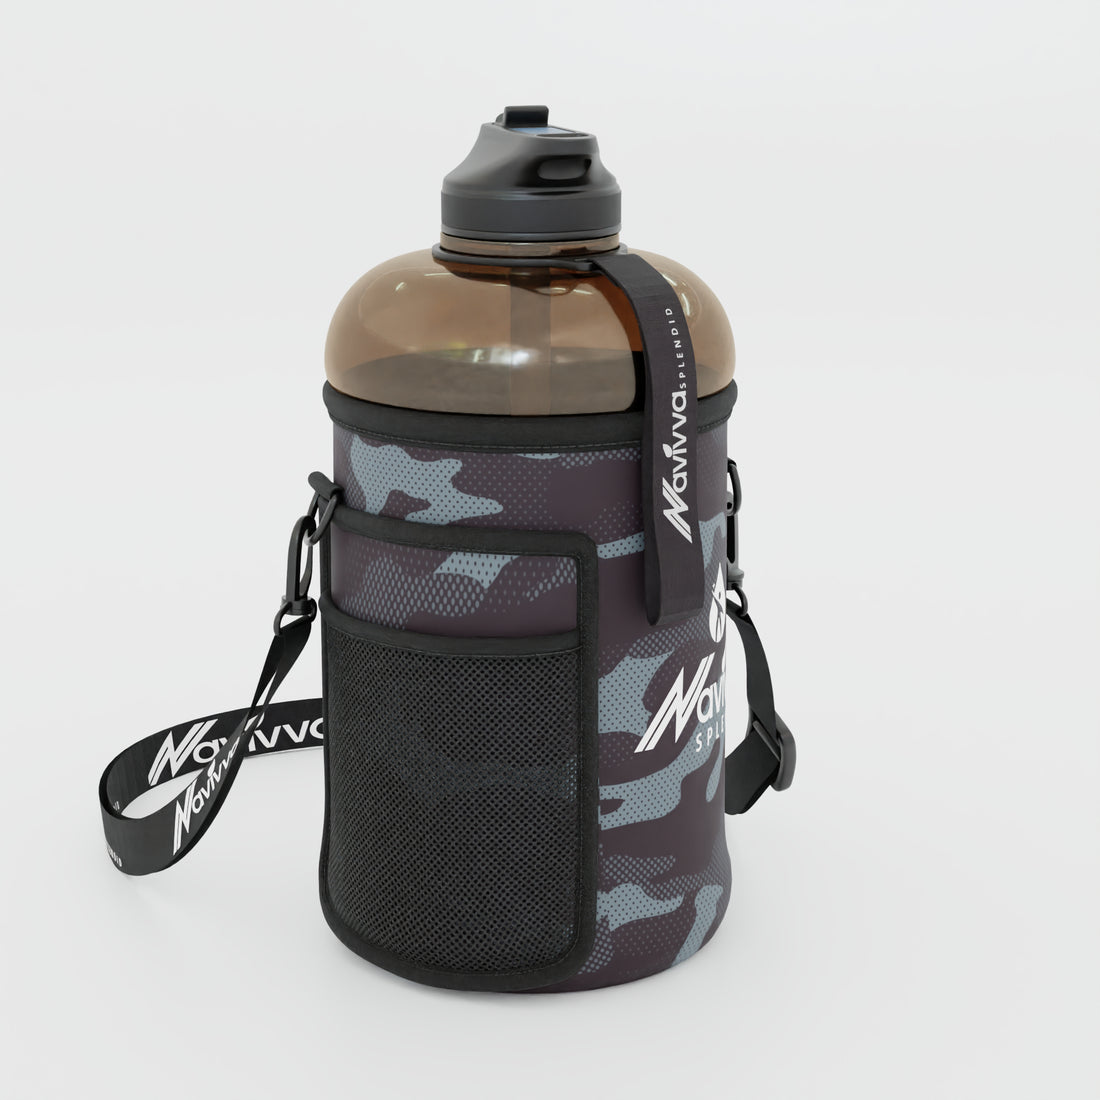 Big gym water bottle with sleeve - black